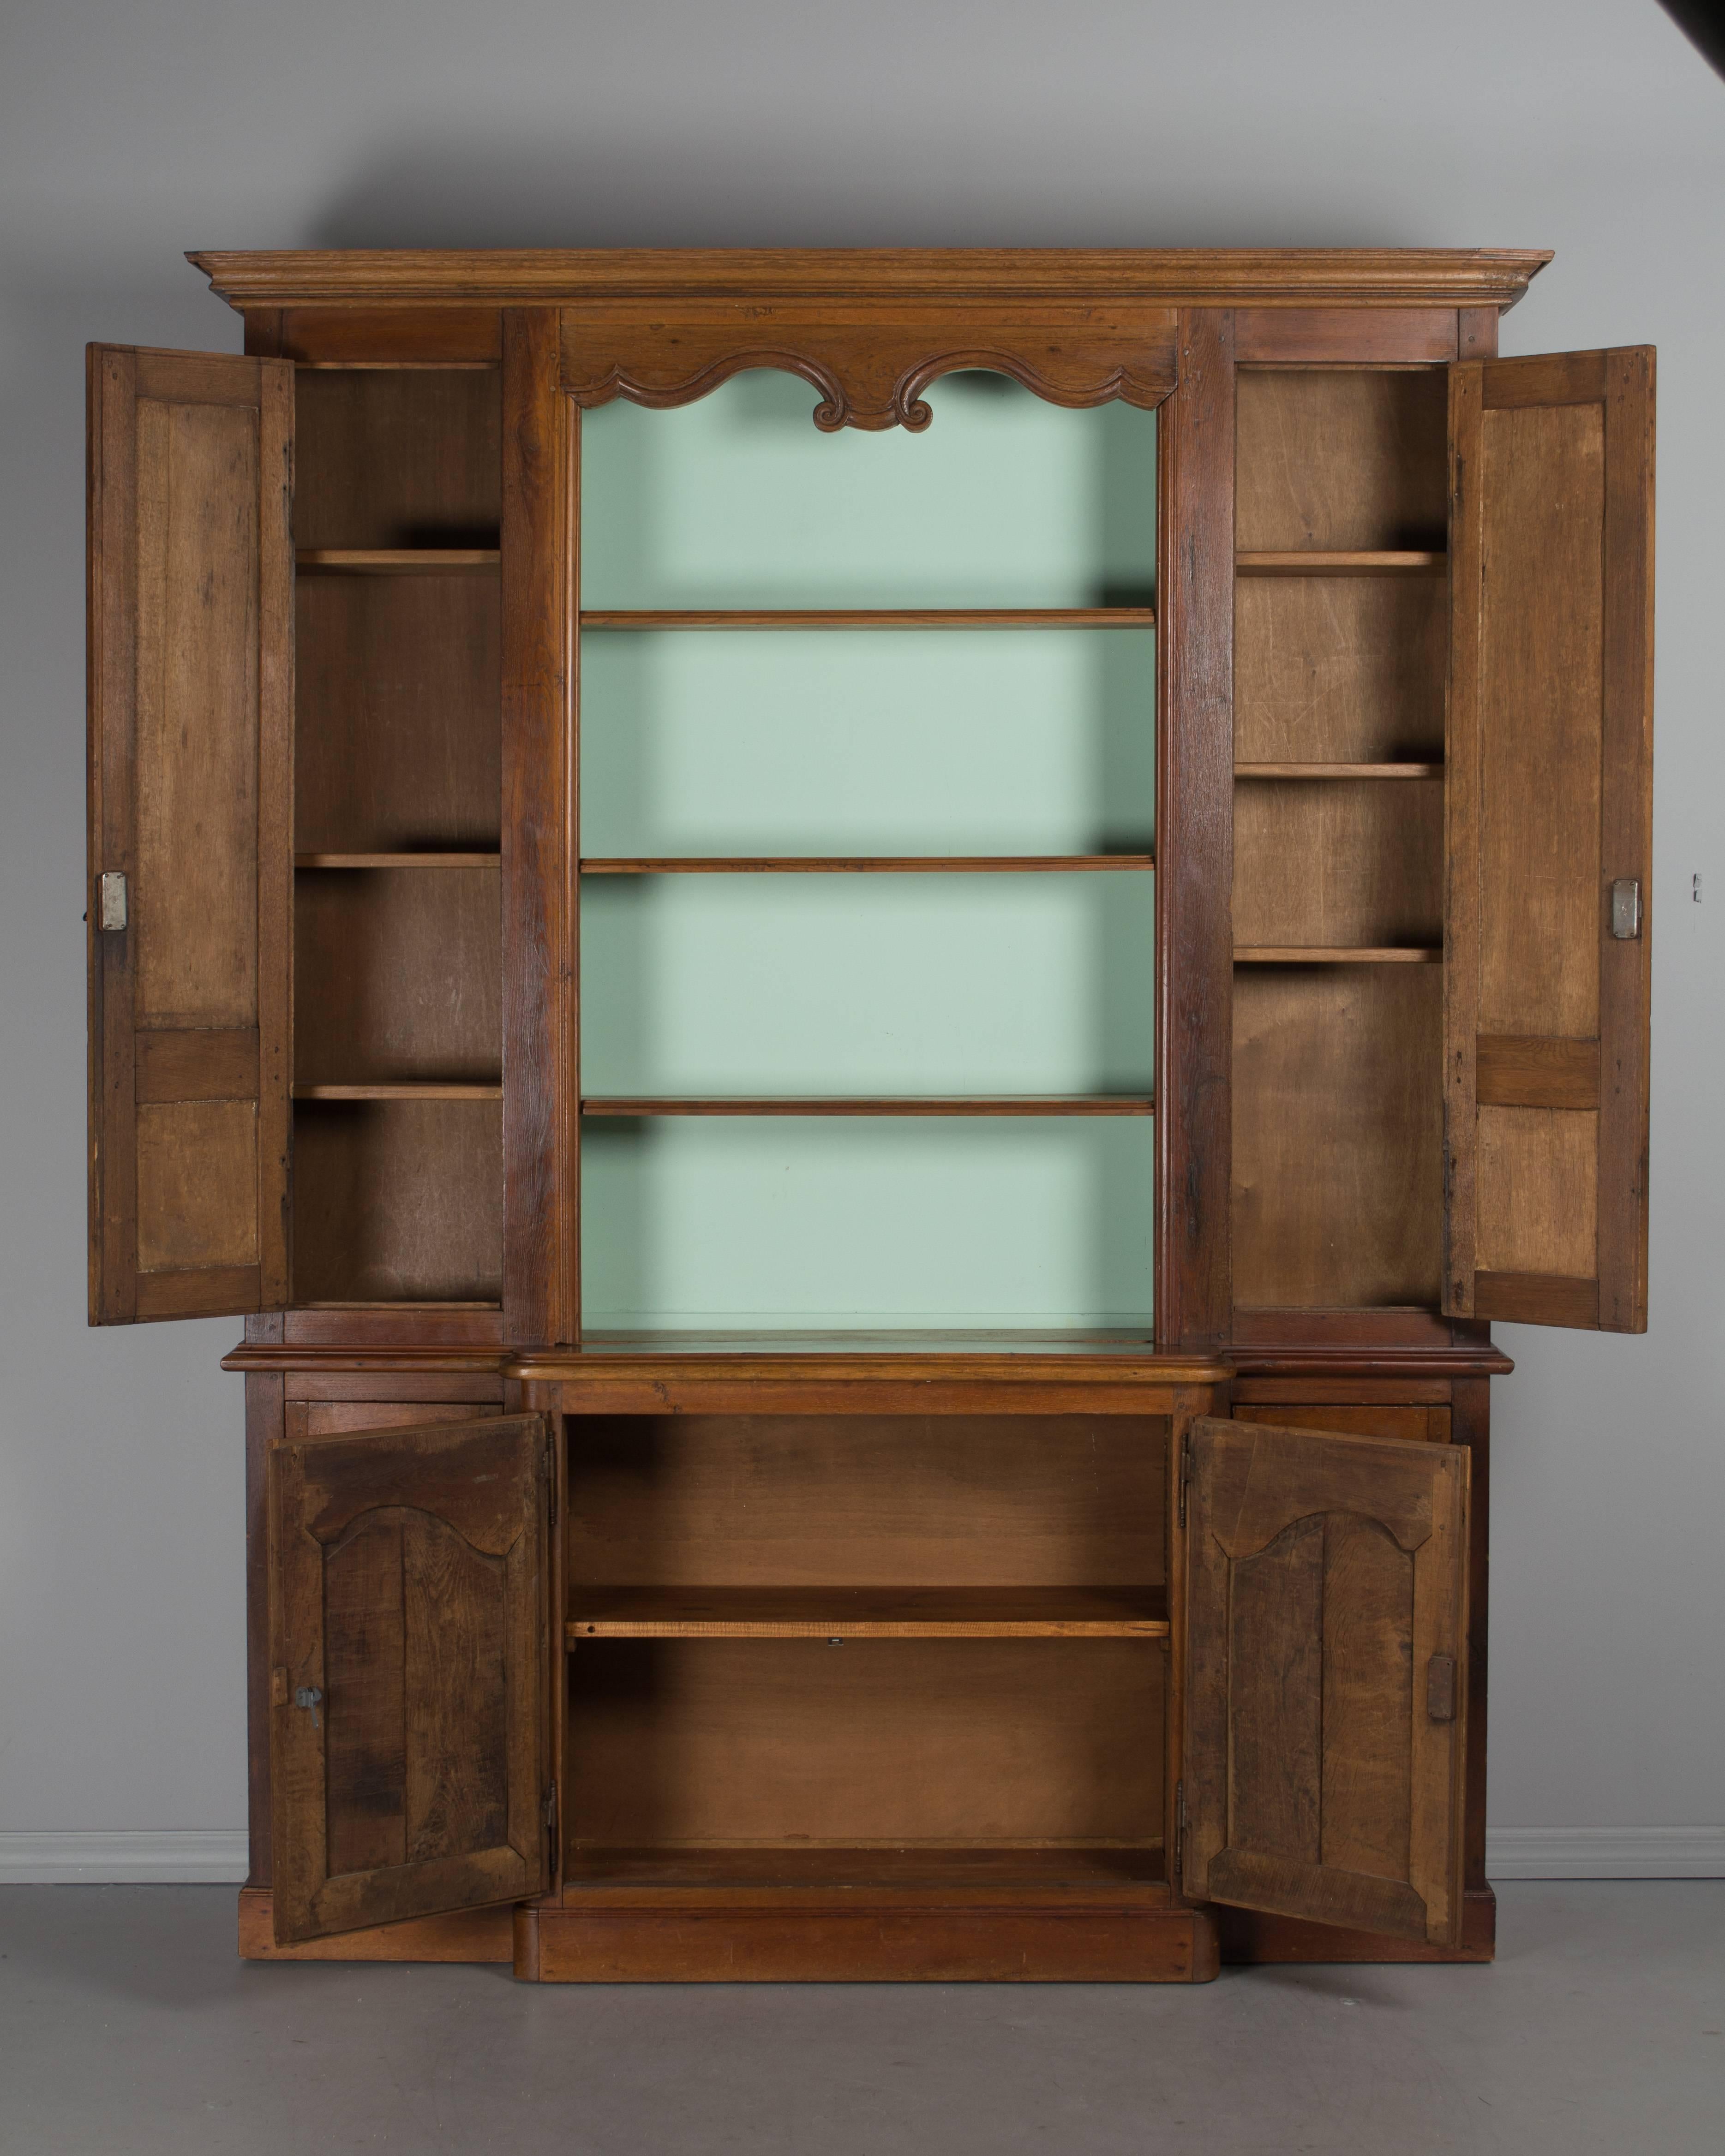 A 19th century Country French biblioteque, or bookcase, made of oak and in three parts. The center is newly painted and has three fixed shelves that measure 7.5